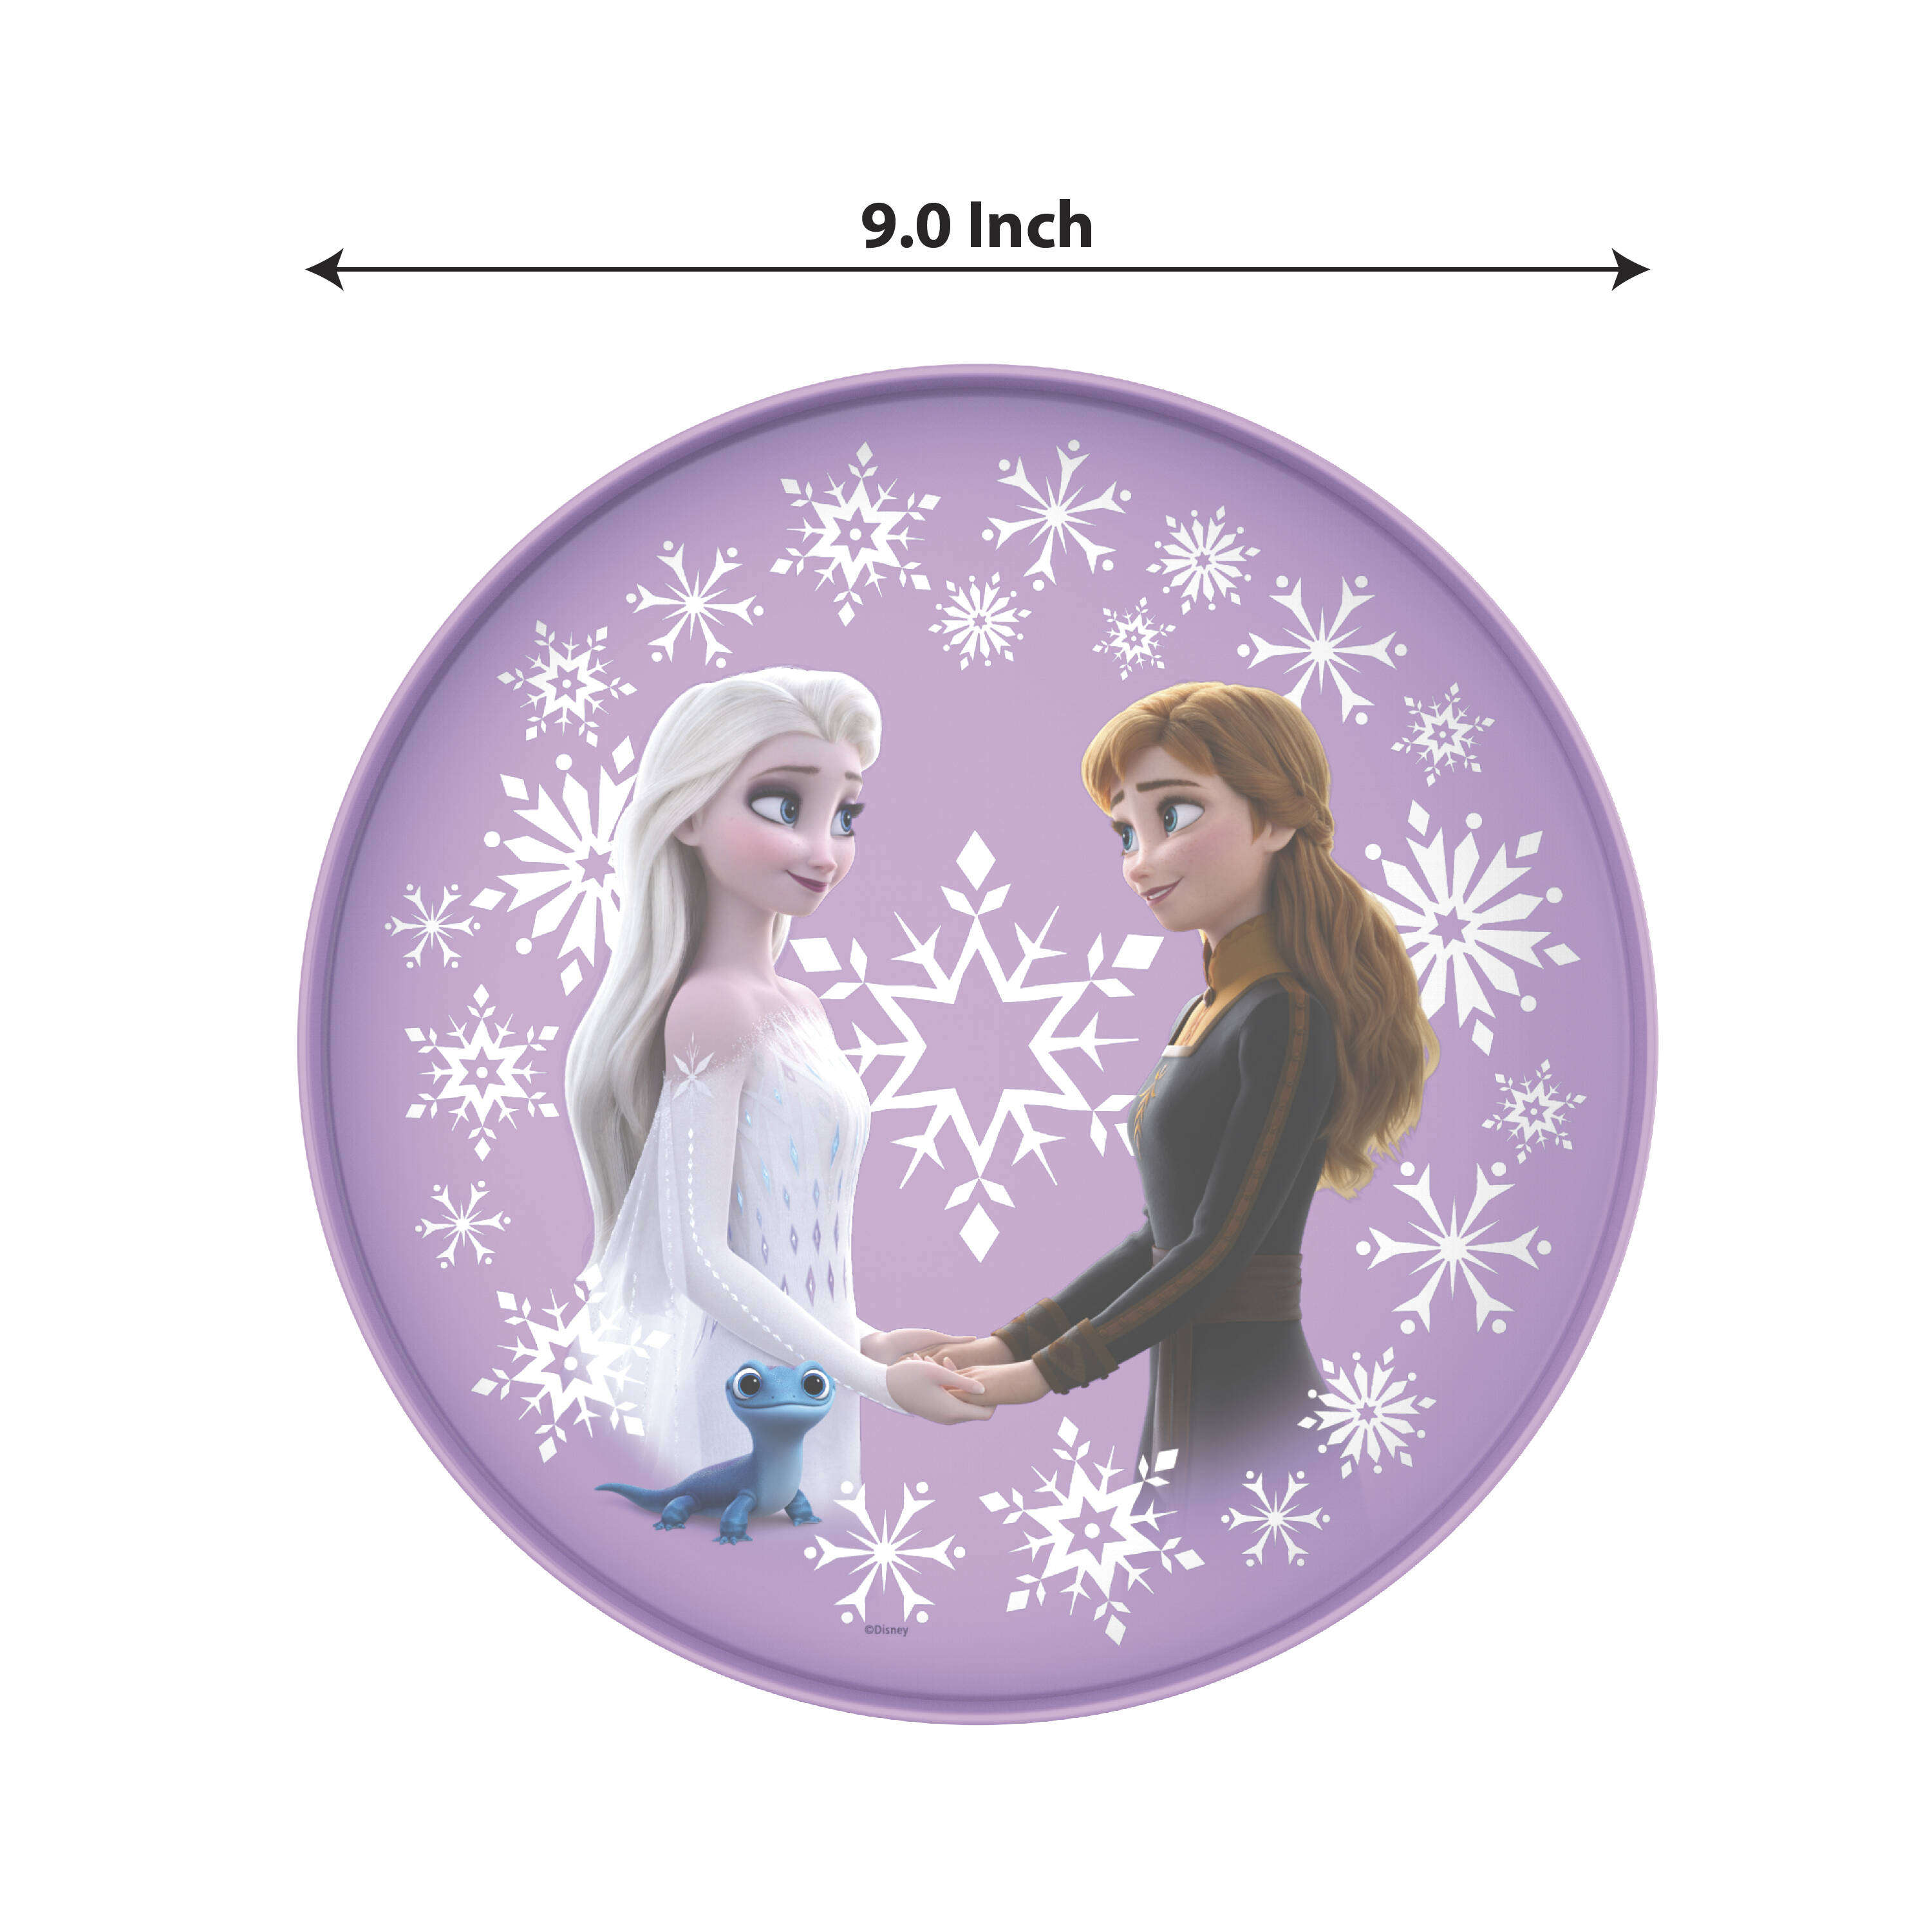 Picnic Plate or Everyday use 22 cm in Diameter Reusable Dinner Plate for Baby or Kids Ideal for Party Plates Disney Frozen 2 Plastic Plate for Kids 